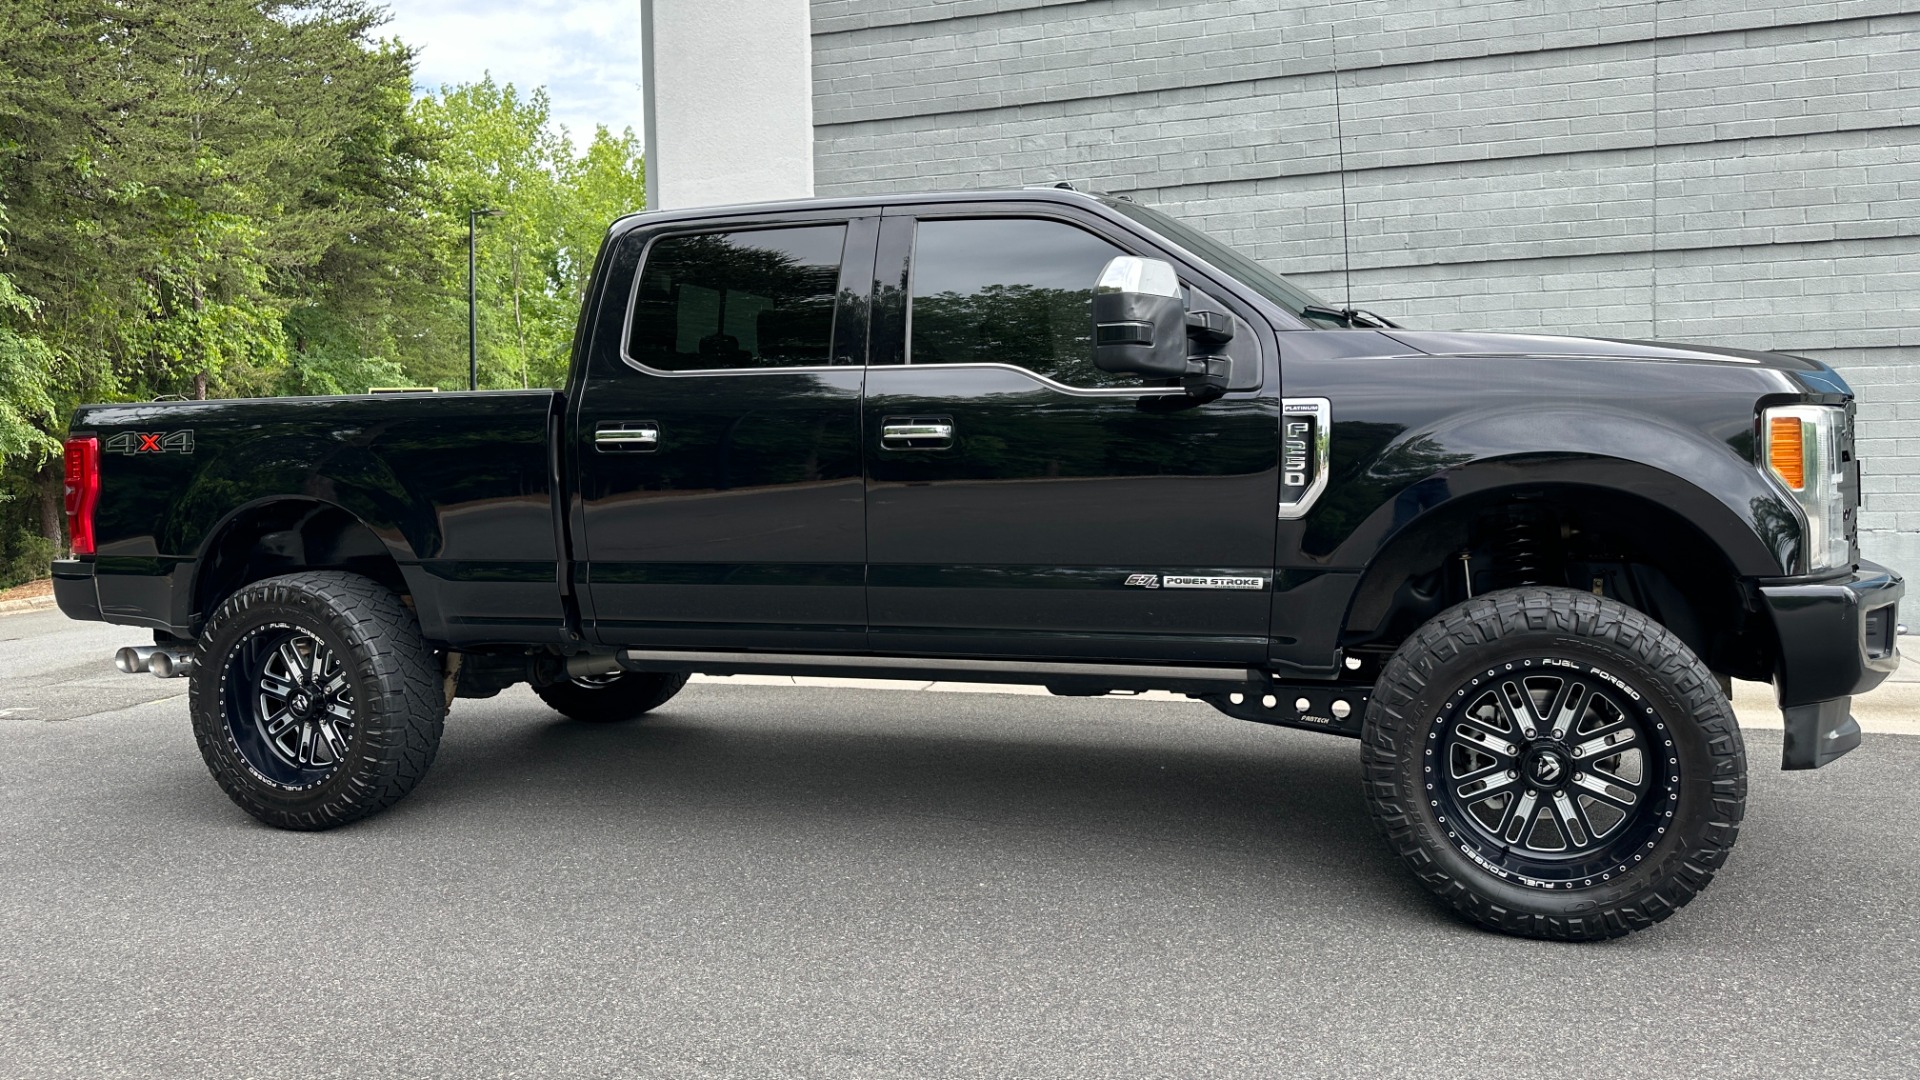 Used 2017 Ford Super Duty F-250 SRW PLATINUM / FABTECH LIFT / FUEL WHEELS / PANORAMIC ROOF / ROCK LIGHTS for sale $62,995 at Formula Imports in Charlotte NC 28227 5